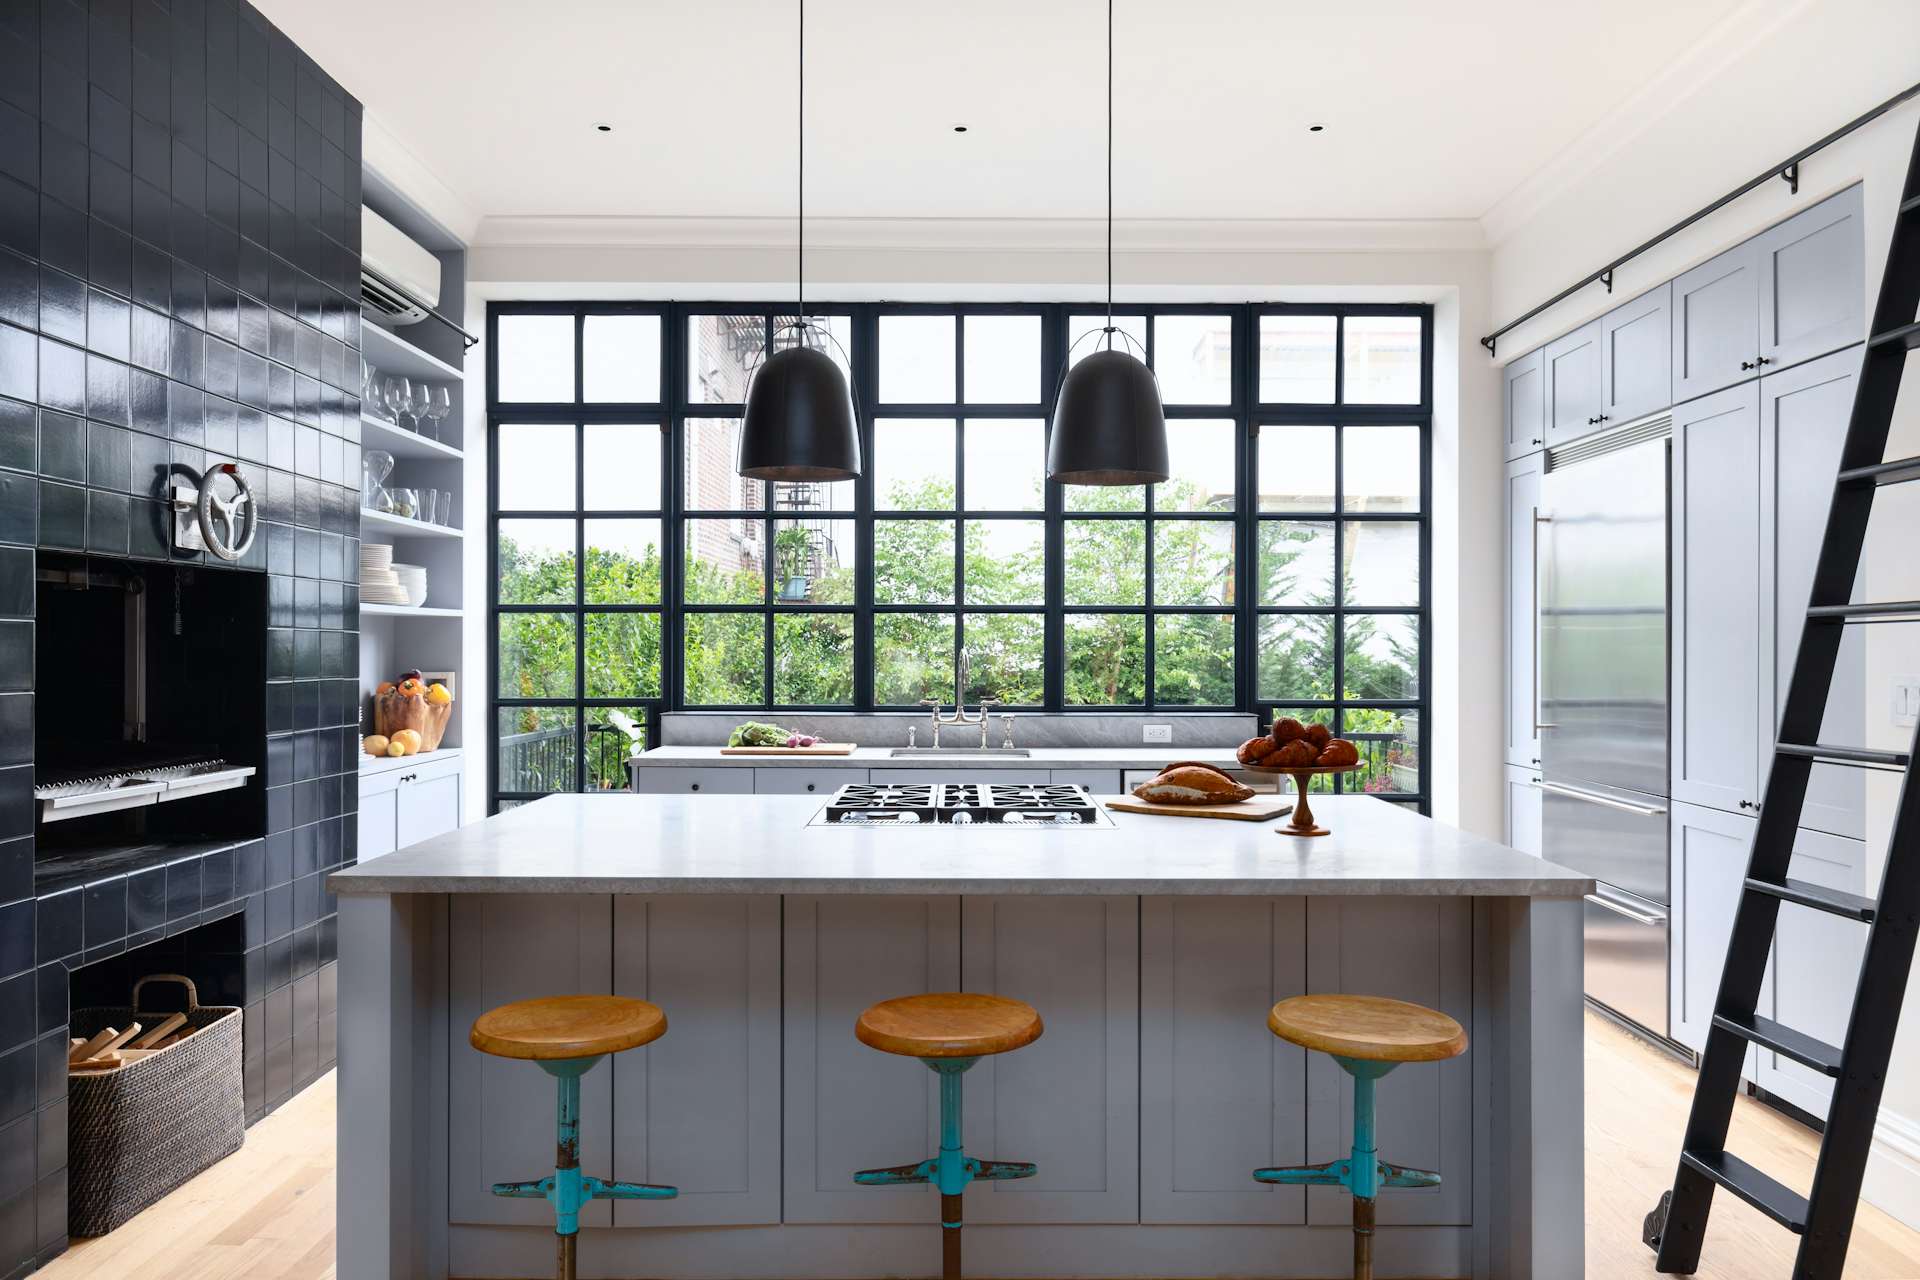 A Beautifully Restored Brooklyn Brownstone Is Listed at $4M - Dwell